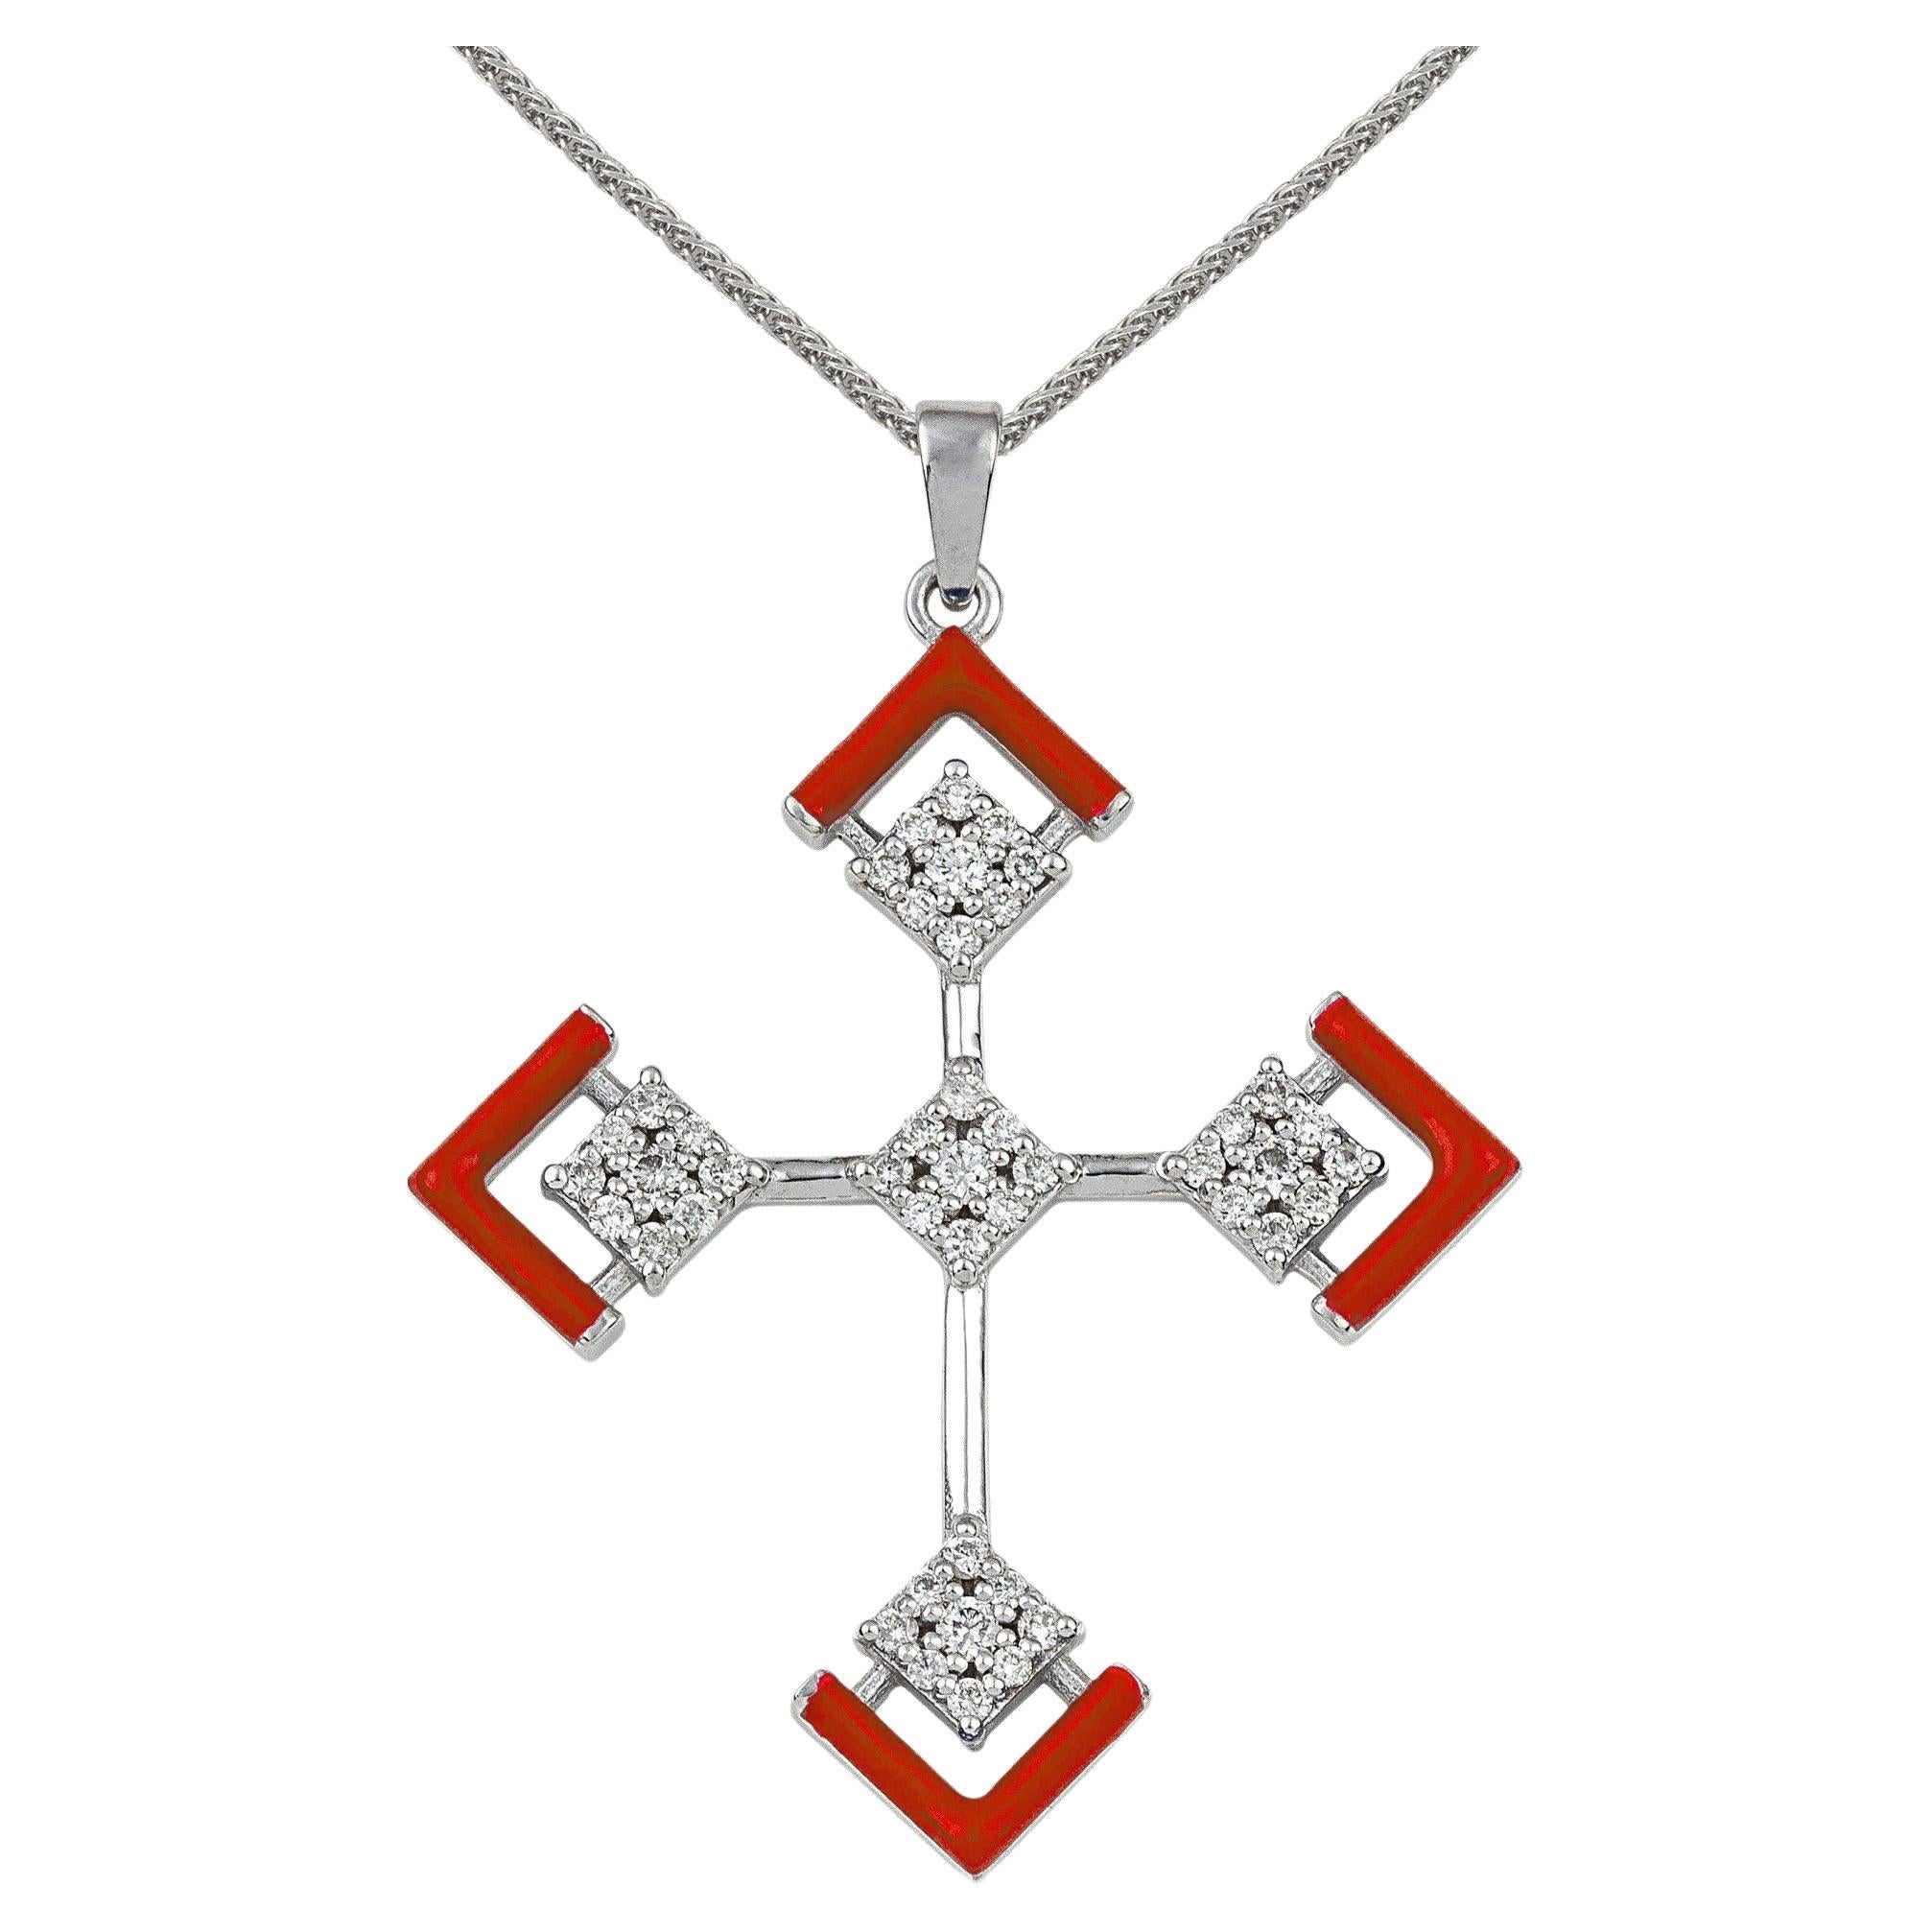 Devotion Gold Cross Necklace with Diamonds and Red Enamel